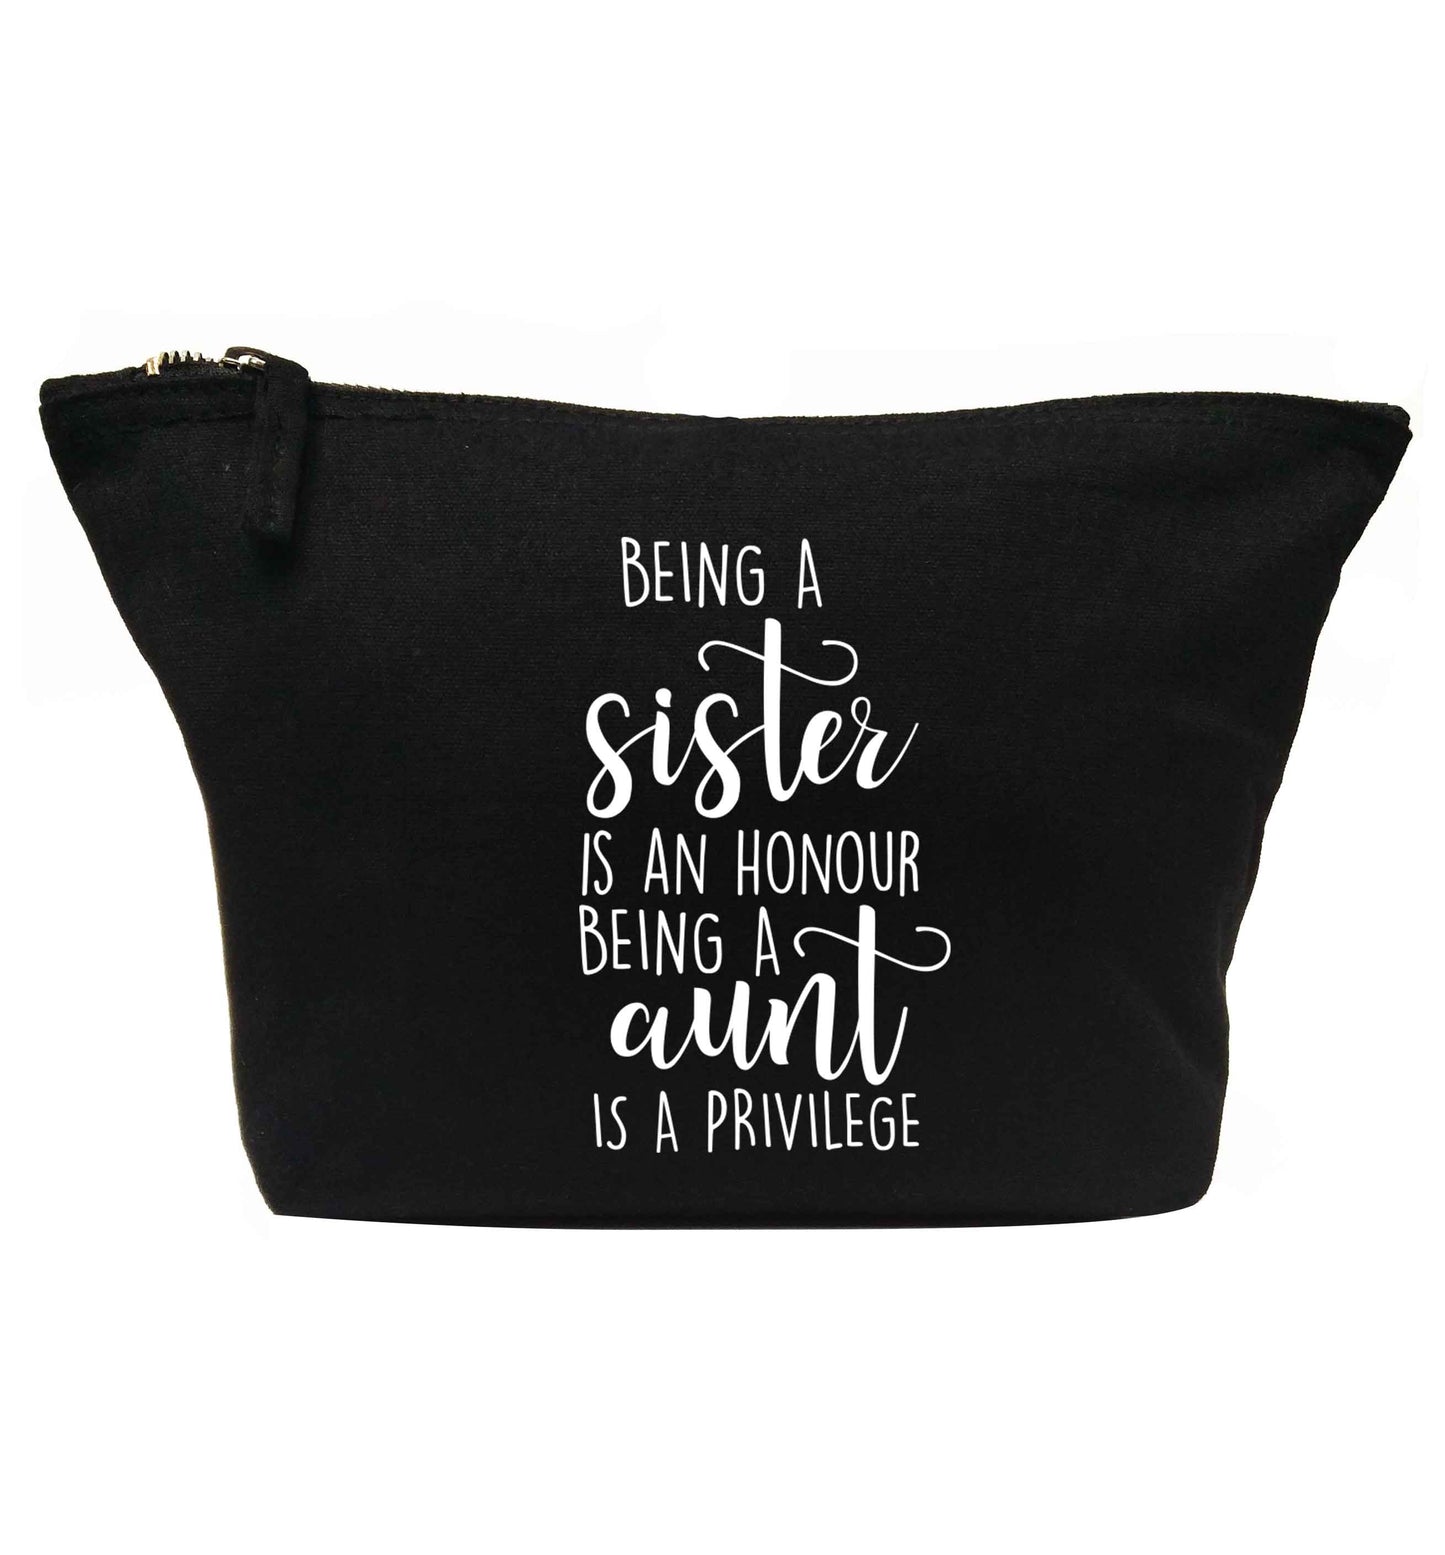 Being a sister is an honour being an auntie is a privilege | makeup / wash bag